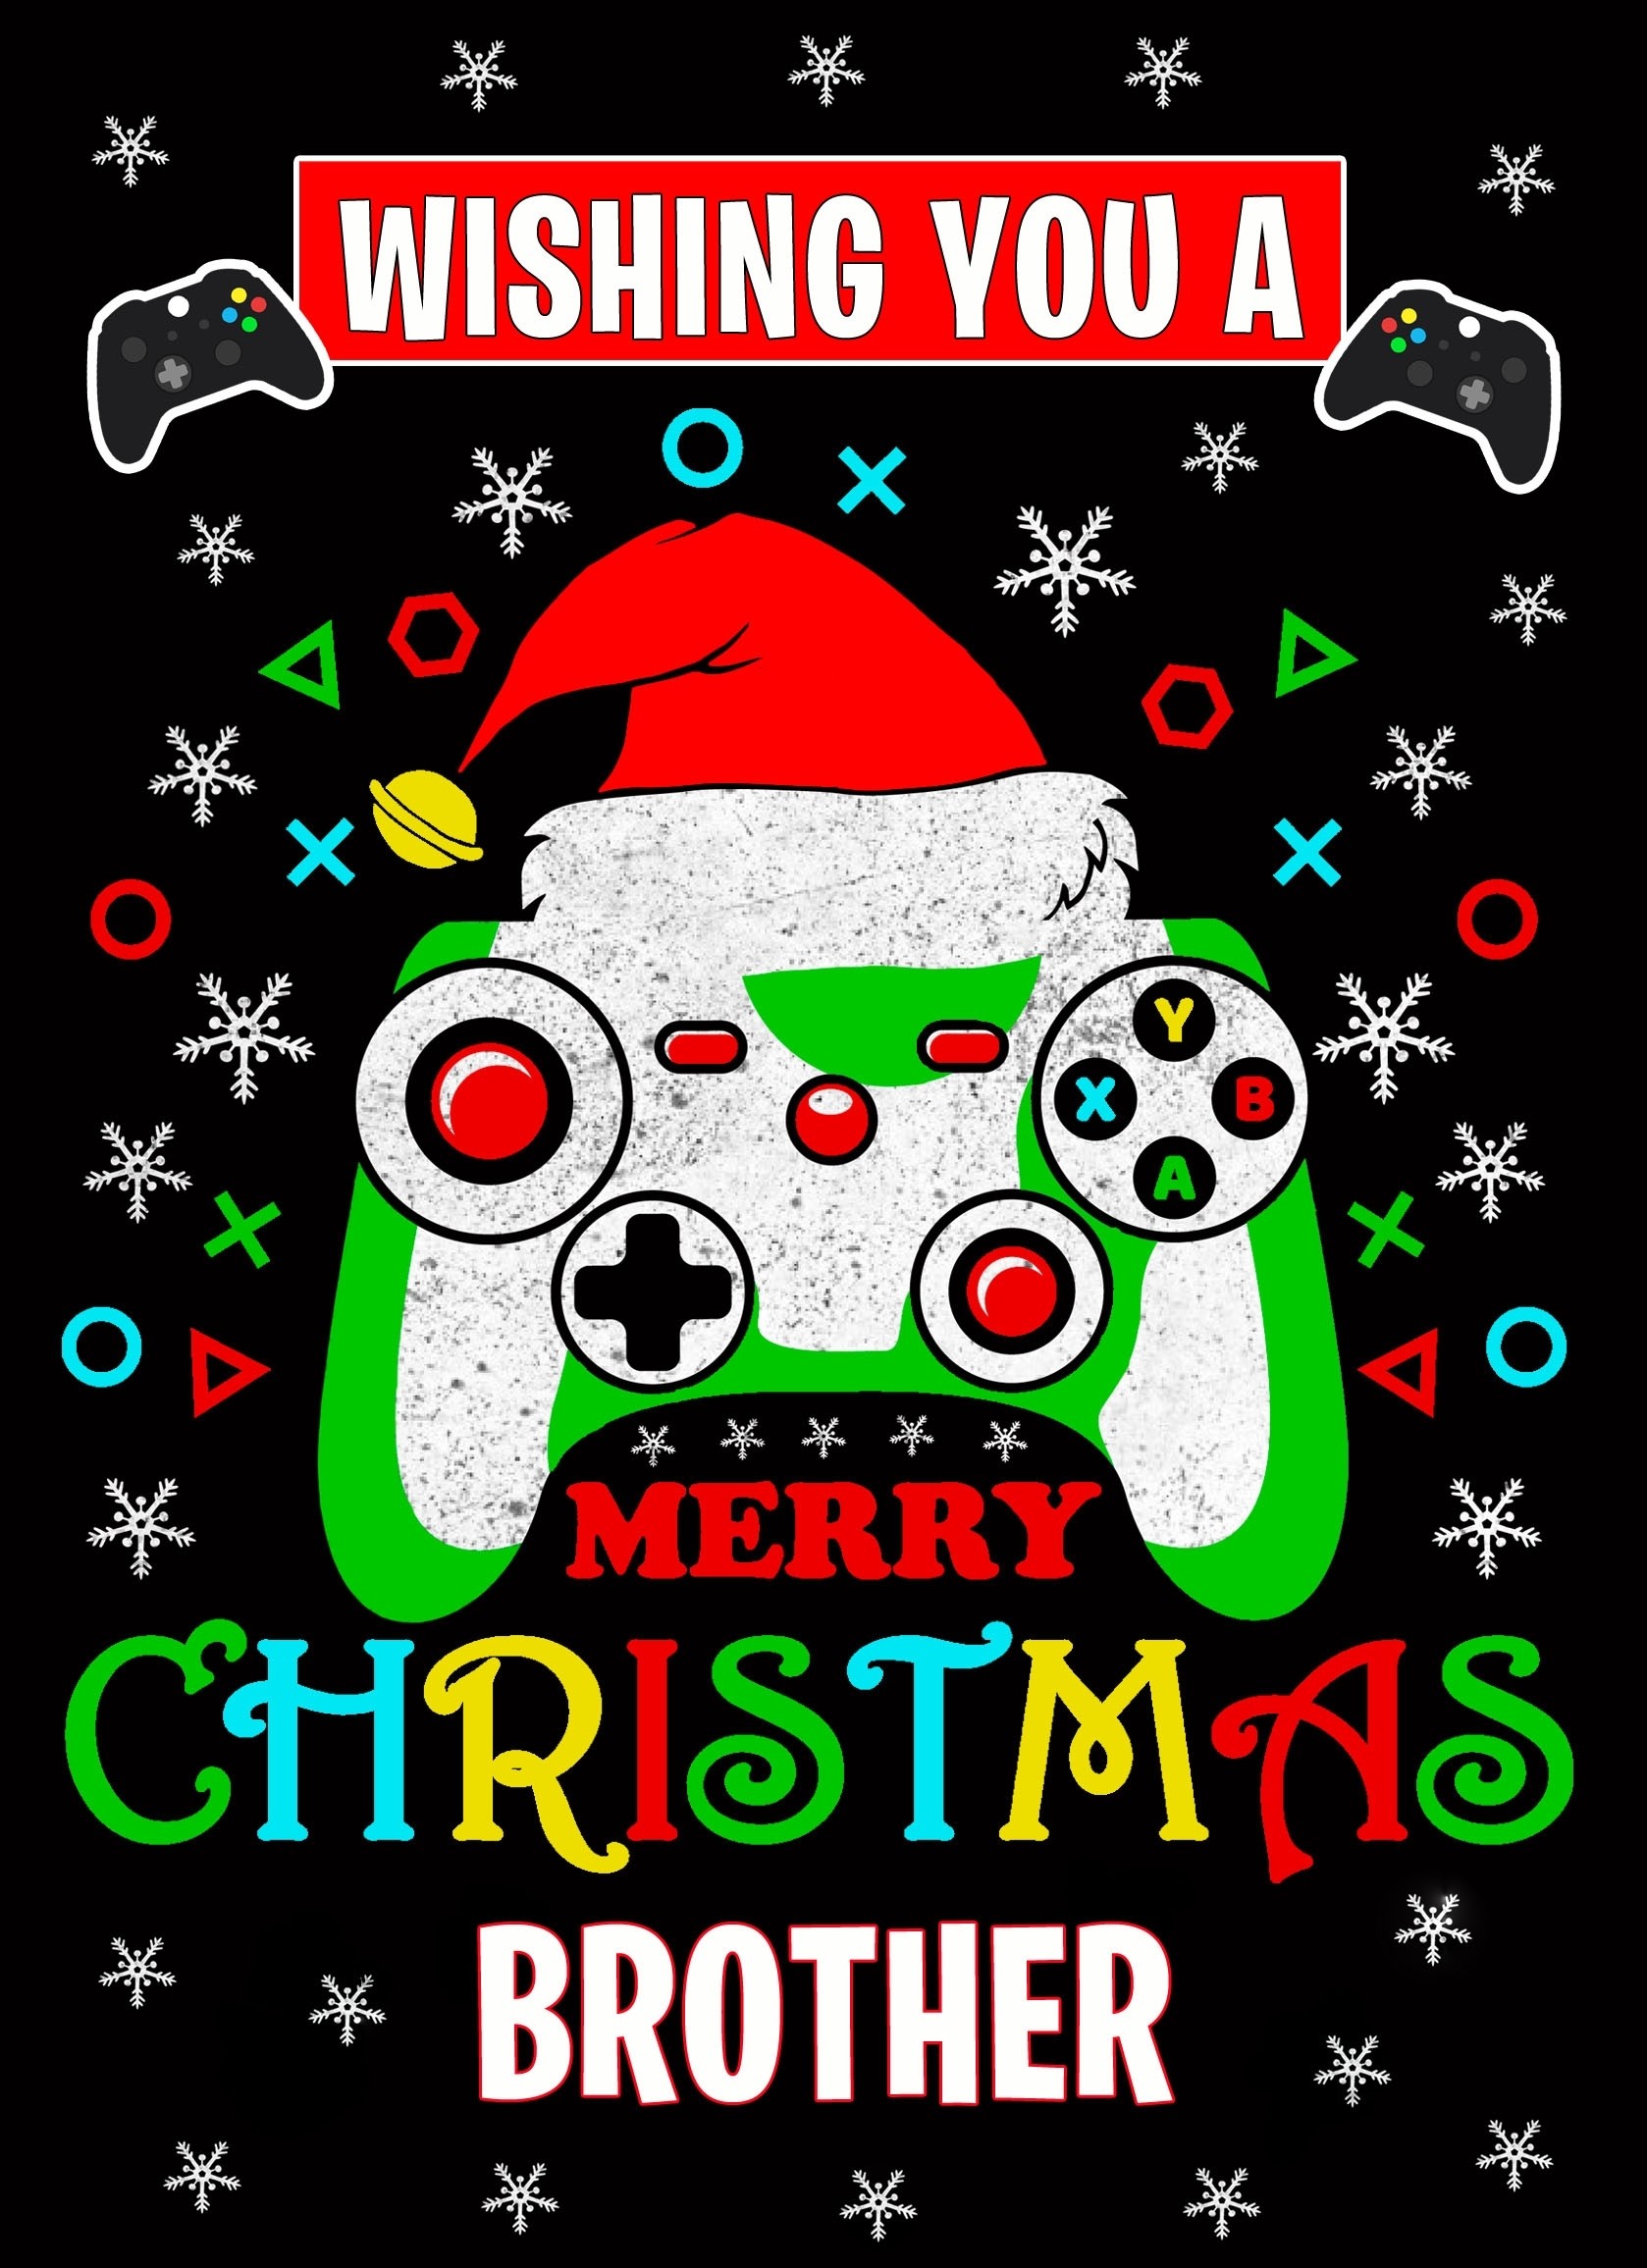 Gamer Christmas Card For Brother